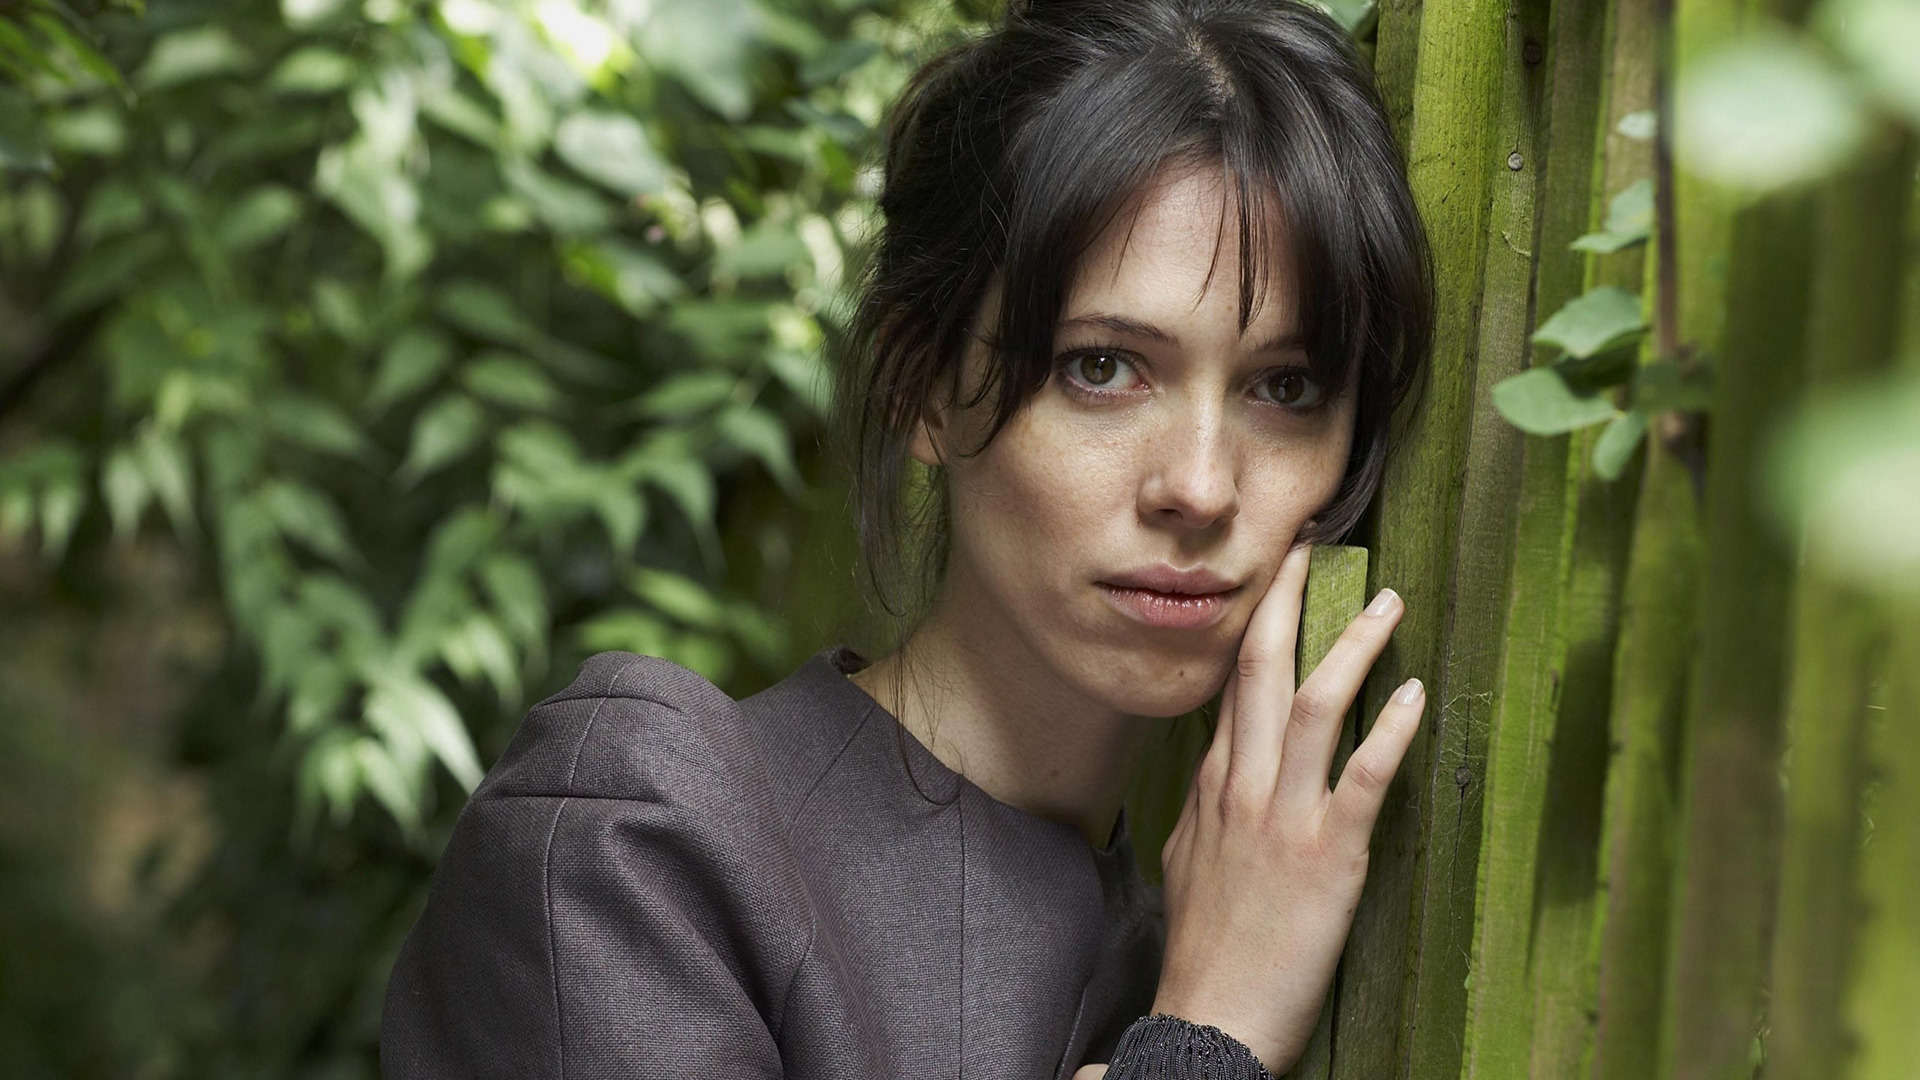 Rebecca Hall, High resolution wallpapers, Quality download, 1920x1080 Full HD Desktop